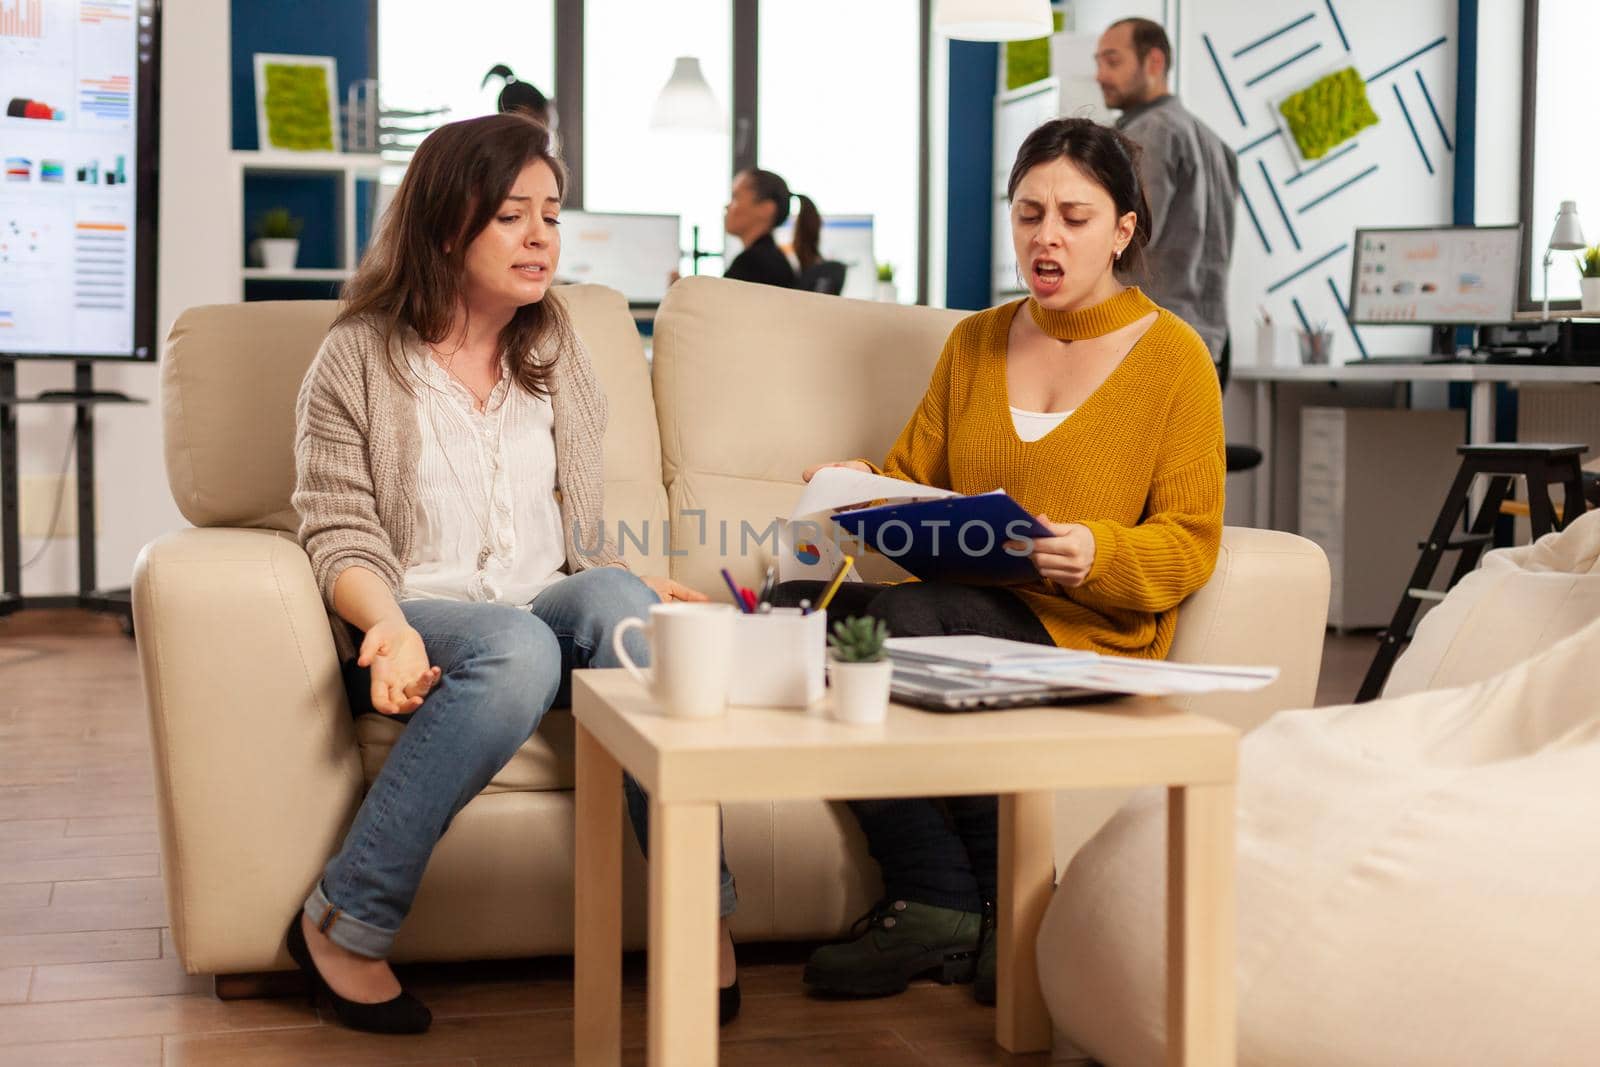 Woman leader yelling at employee sitting on couch in new start up business, upset of bad contract agreement. Women colleagues having big conflict, dispute about mistakes from project documents